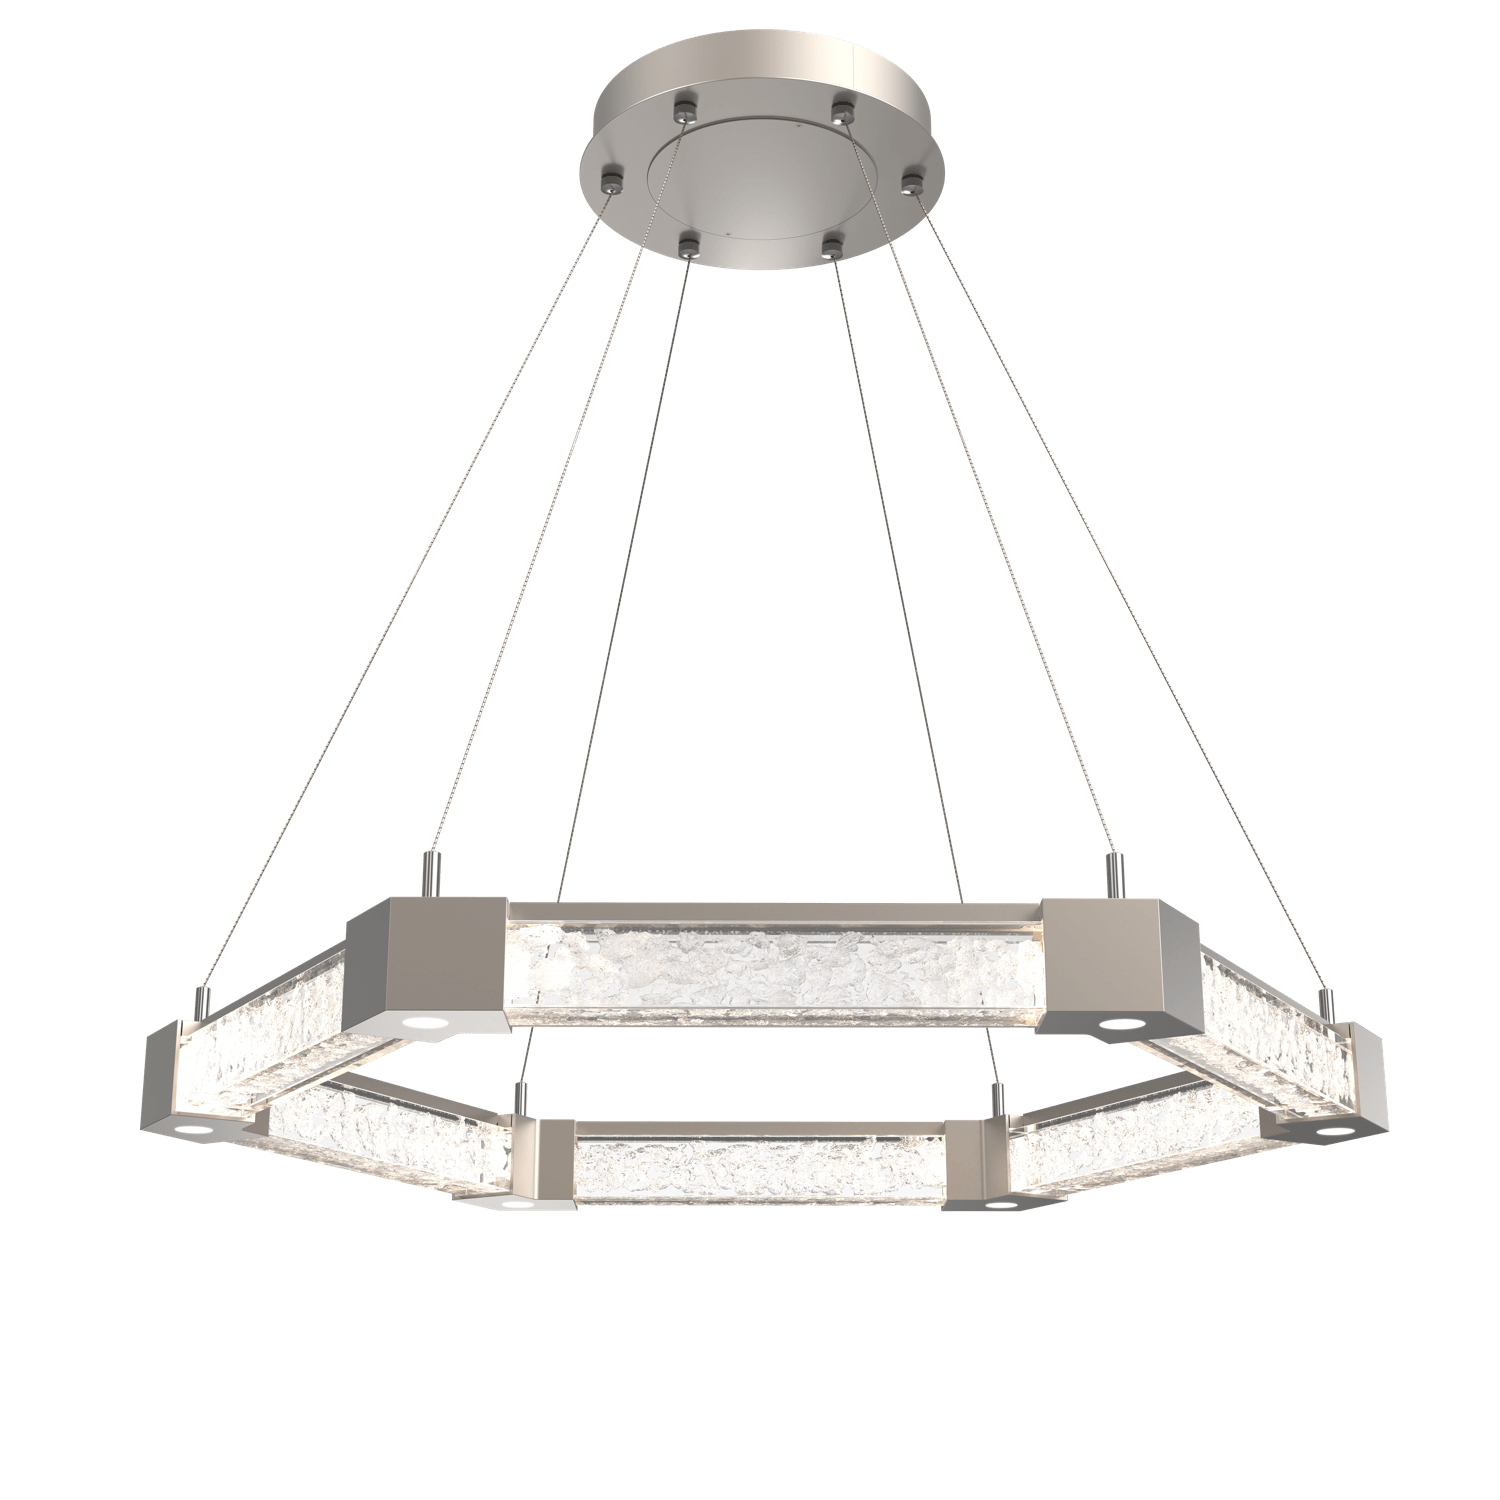 CHB0060-35-BS-GC-Hammerton-Studio-Axis-Hexagonal-Ring-Chandelier-with-Metallic-Beige-Silver-finish-and-clear-cast-glass-and-LED-lamping